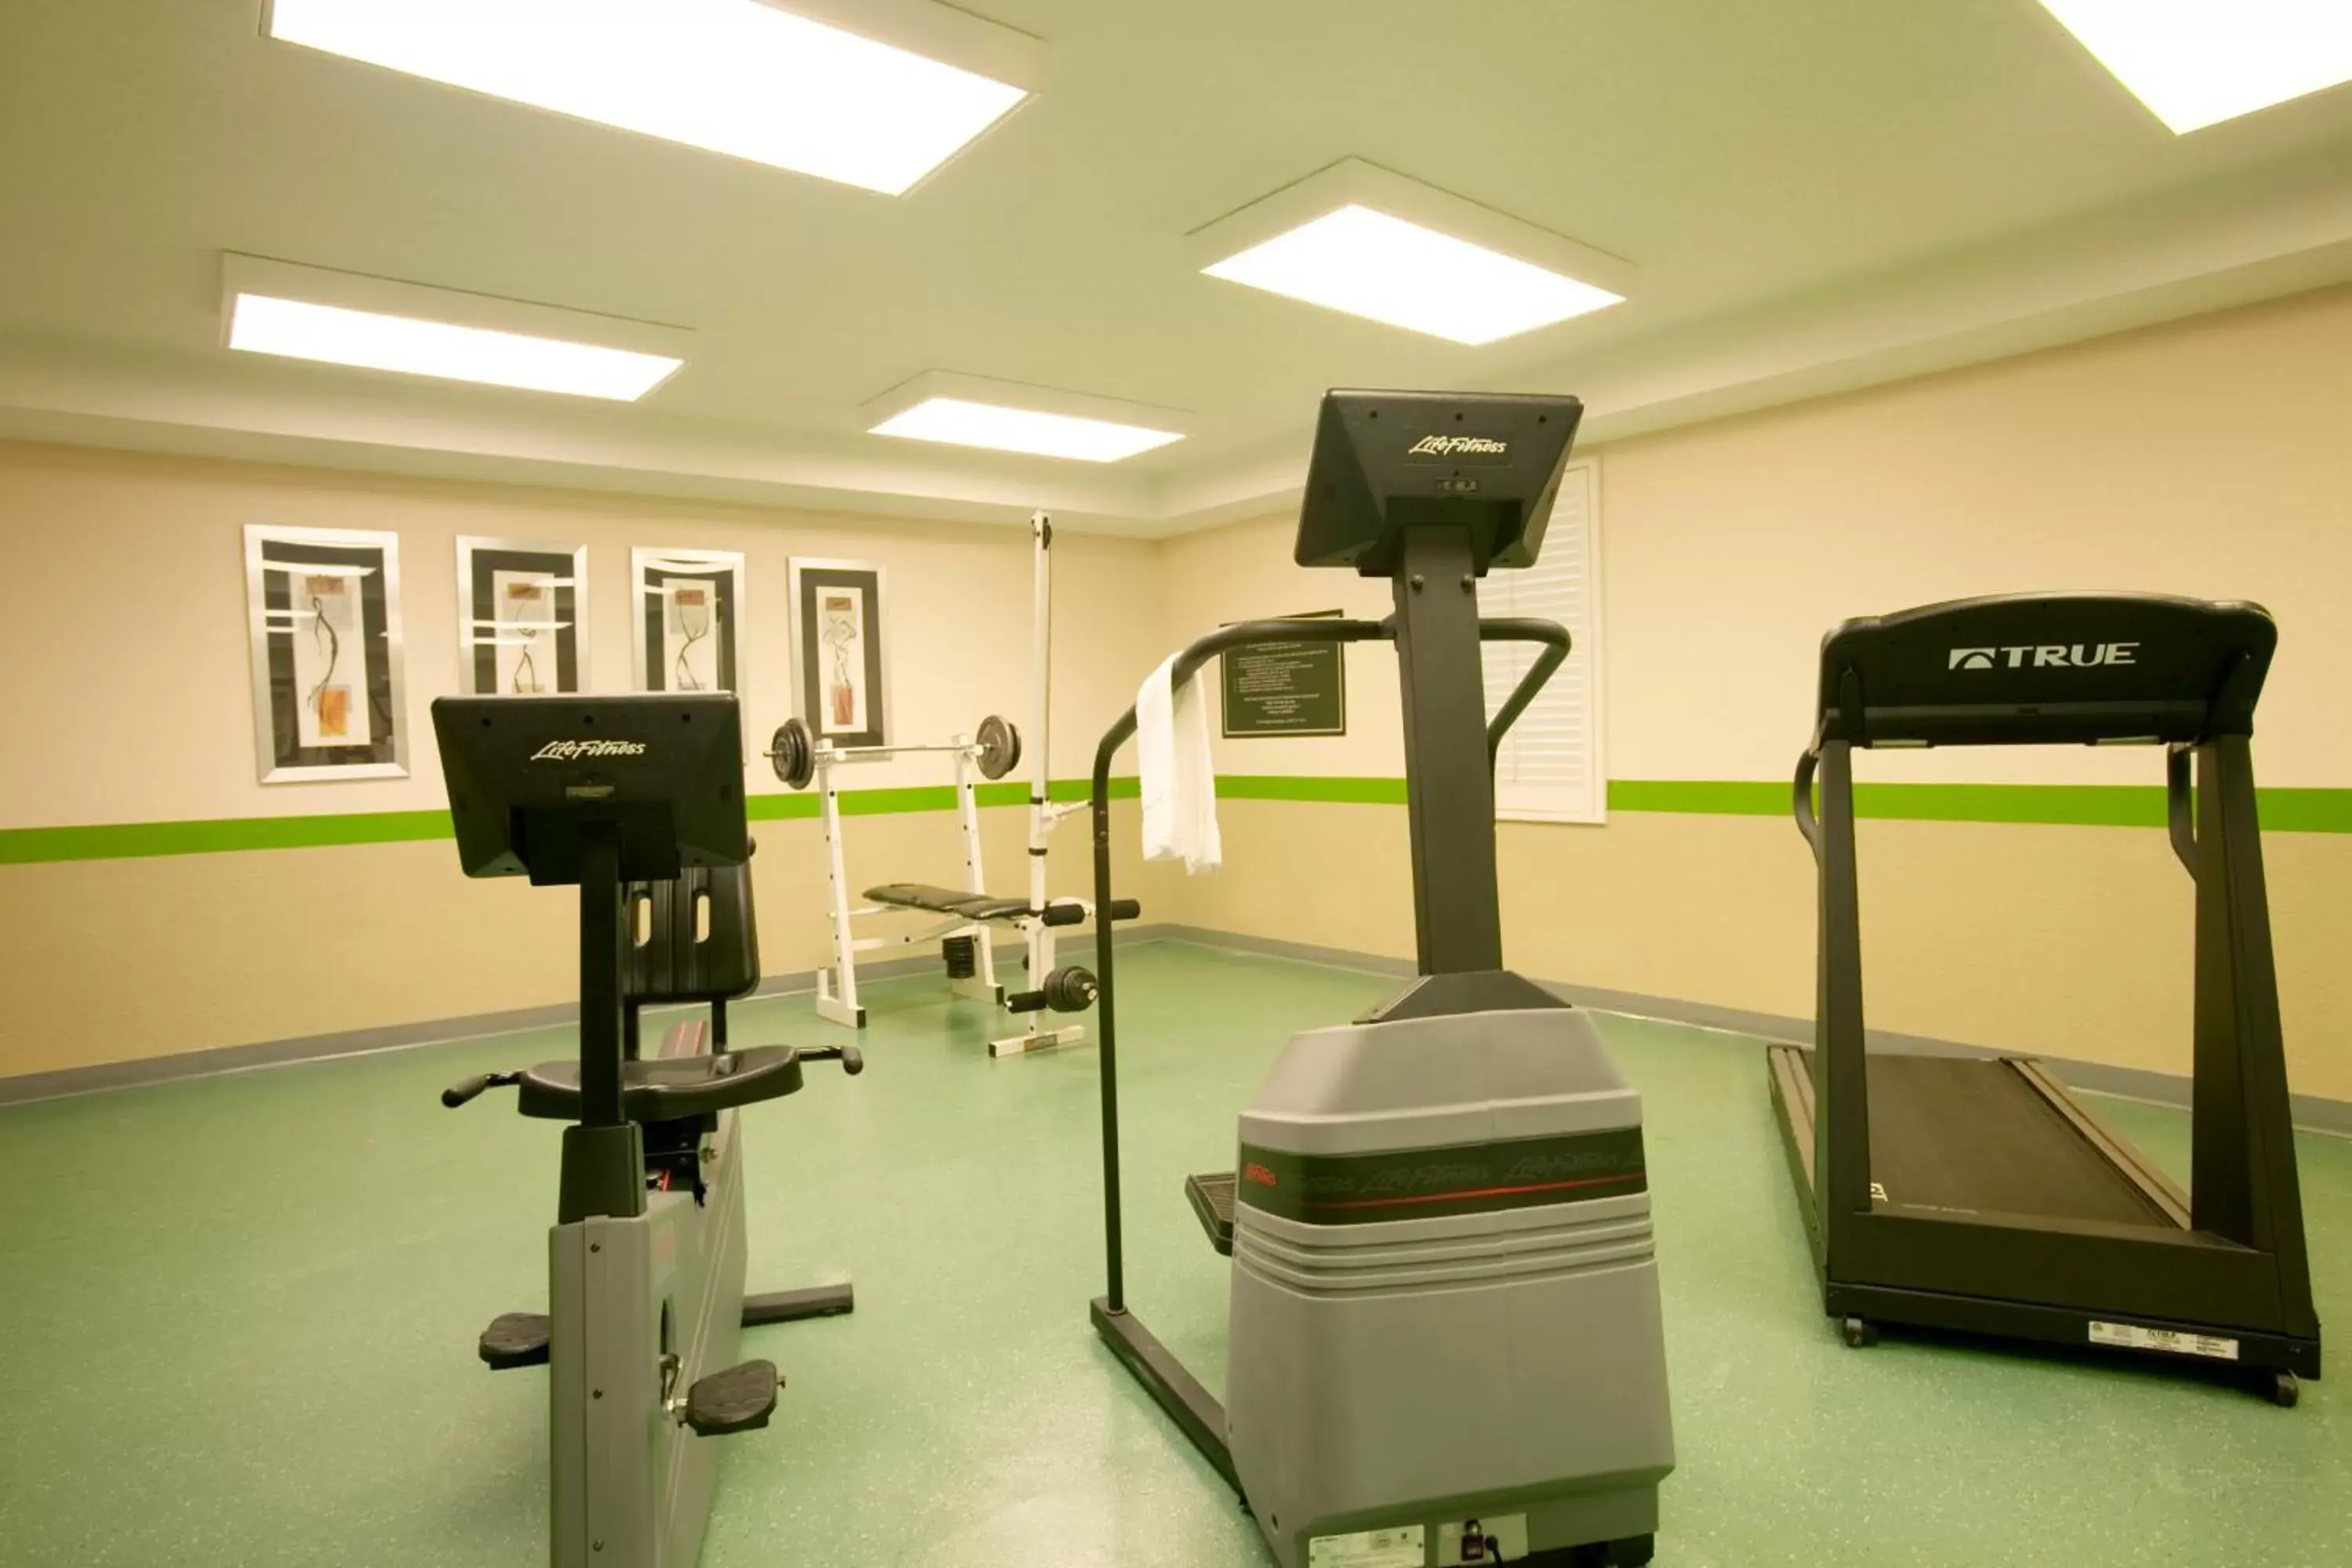 Fitness centre/facilities, Fitness Center/Facilities in Extended Stay America Suites - Detroit - Auburn Hills - Featherstone Rd